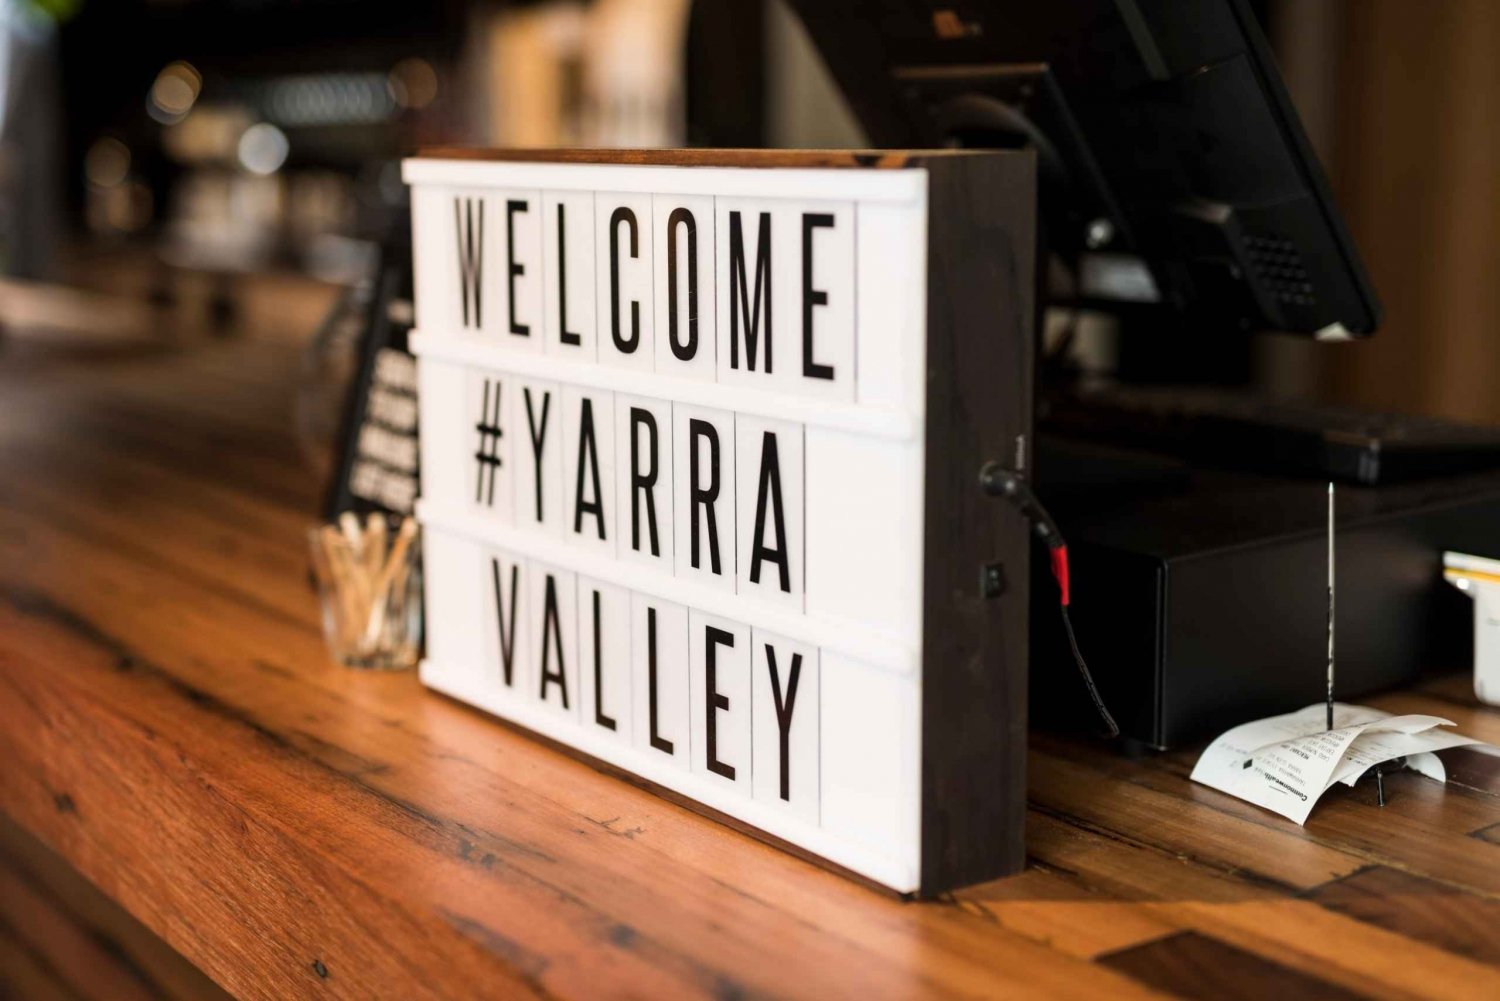 From Melbourne: Yarra Valley Day Trip w/ Wine & Food Tasting